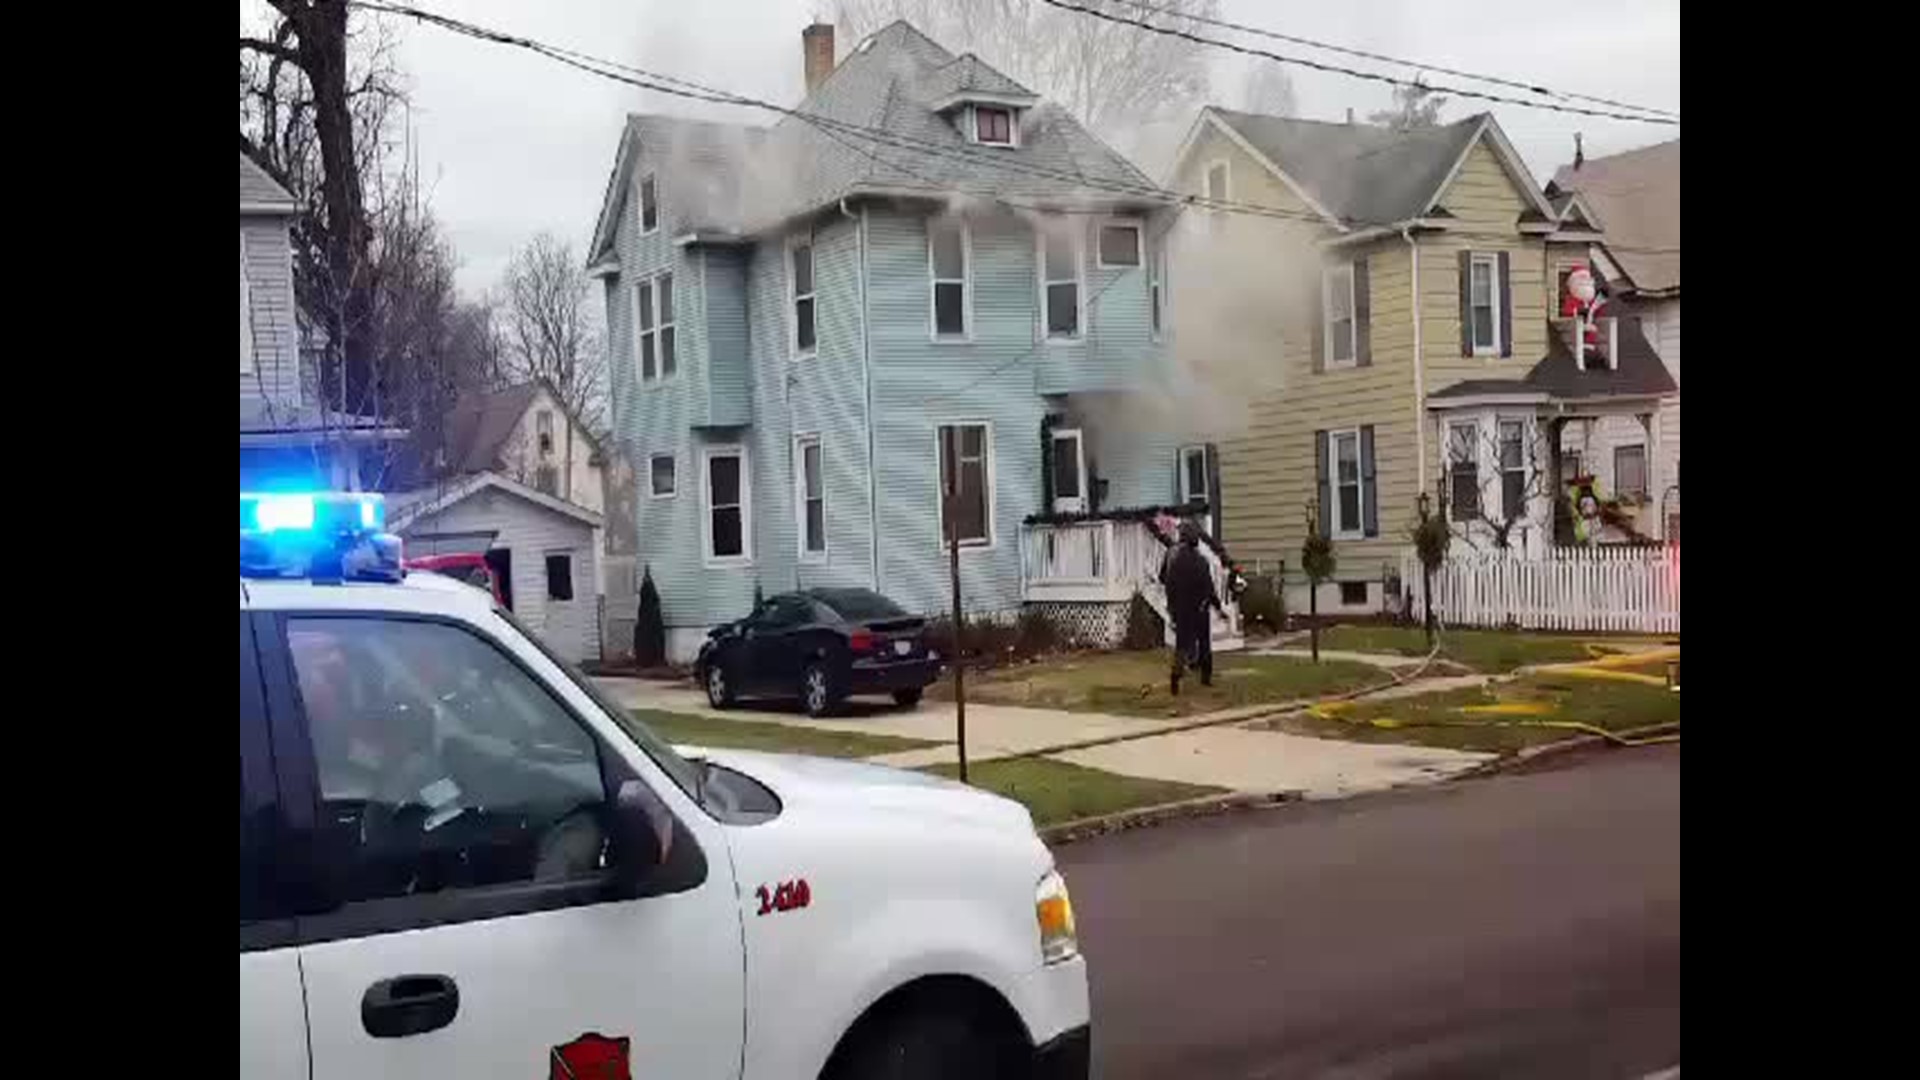 Home on fire in Rock Island, Illinois